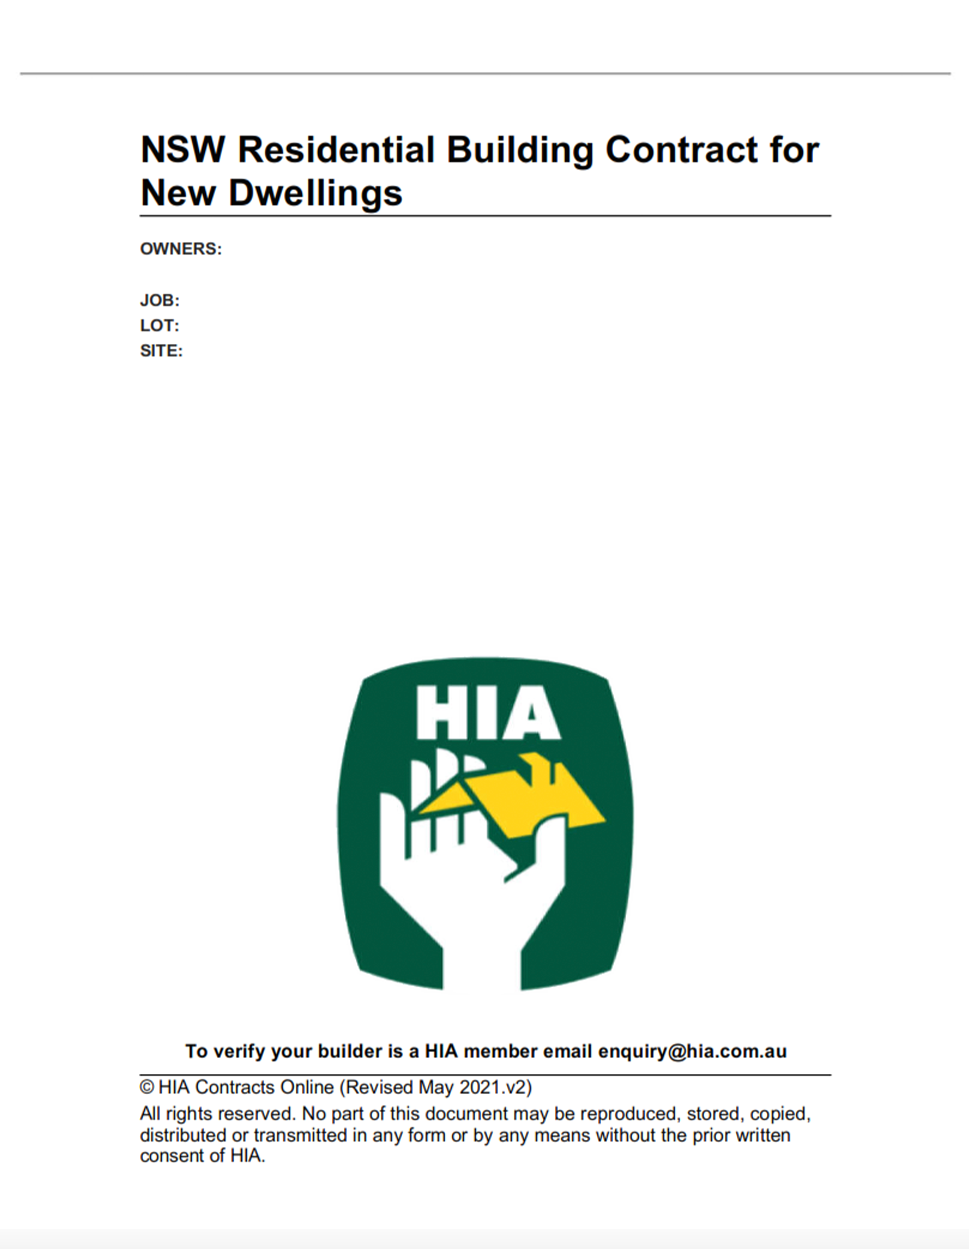 HIA NSW Residential Building Contract for New Dwellings